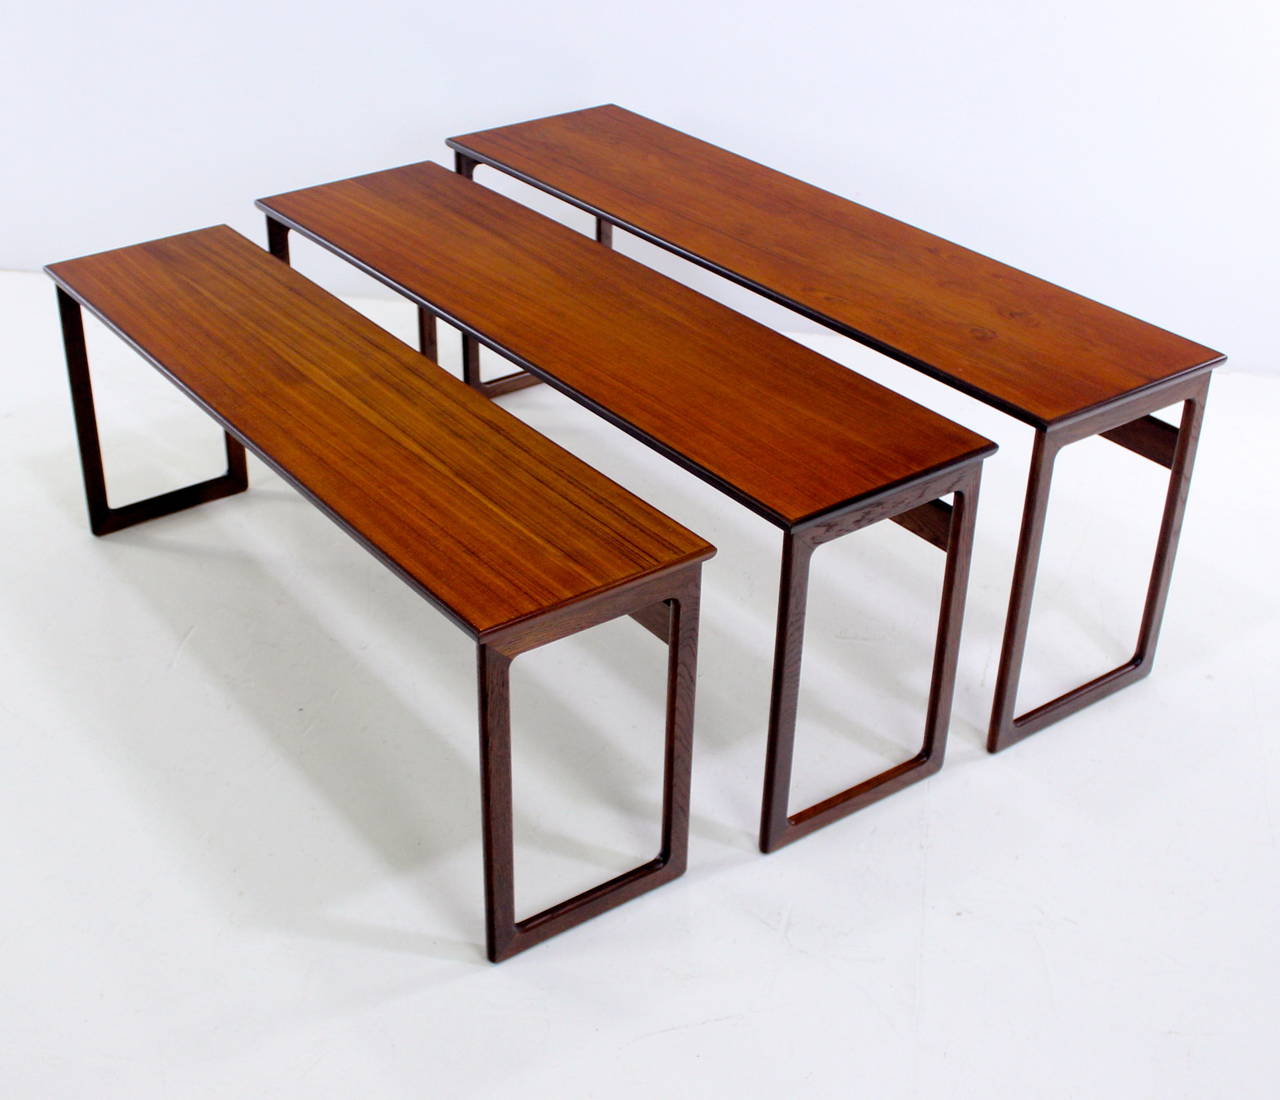 Set of Three Exquisite Danish ModernTeak Nesting Tables In Excellent Condition For Sale In Portland, OR